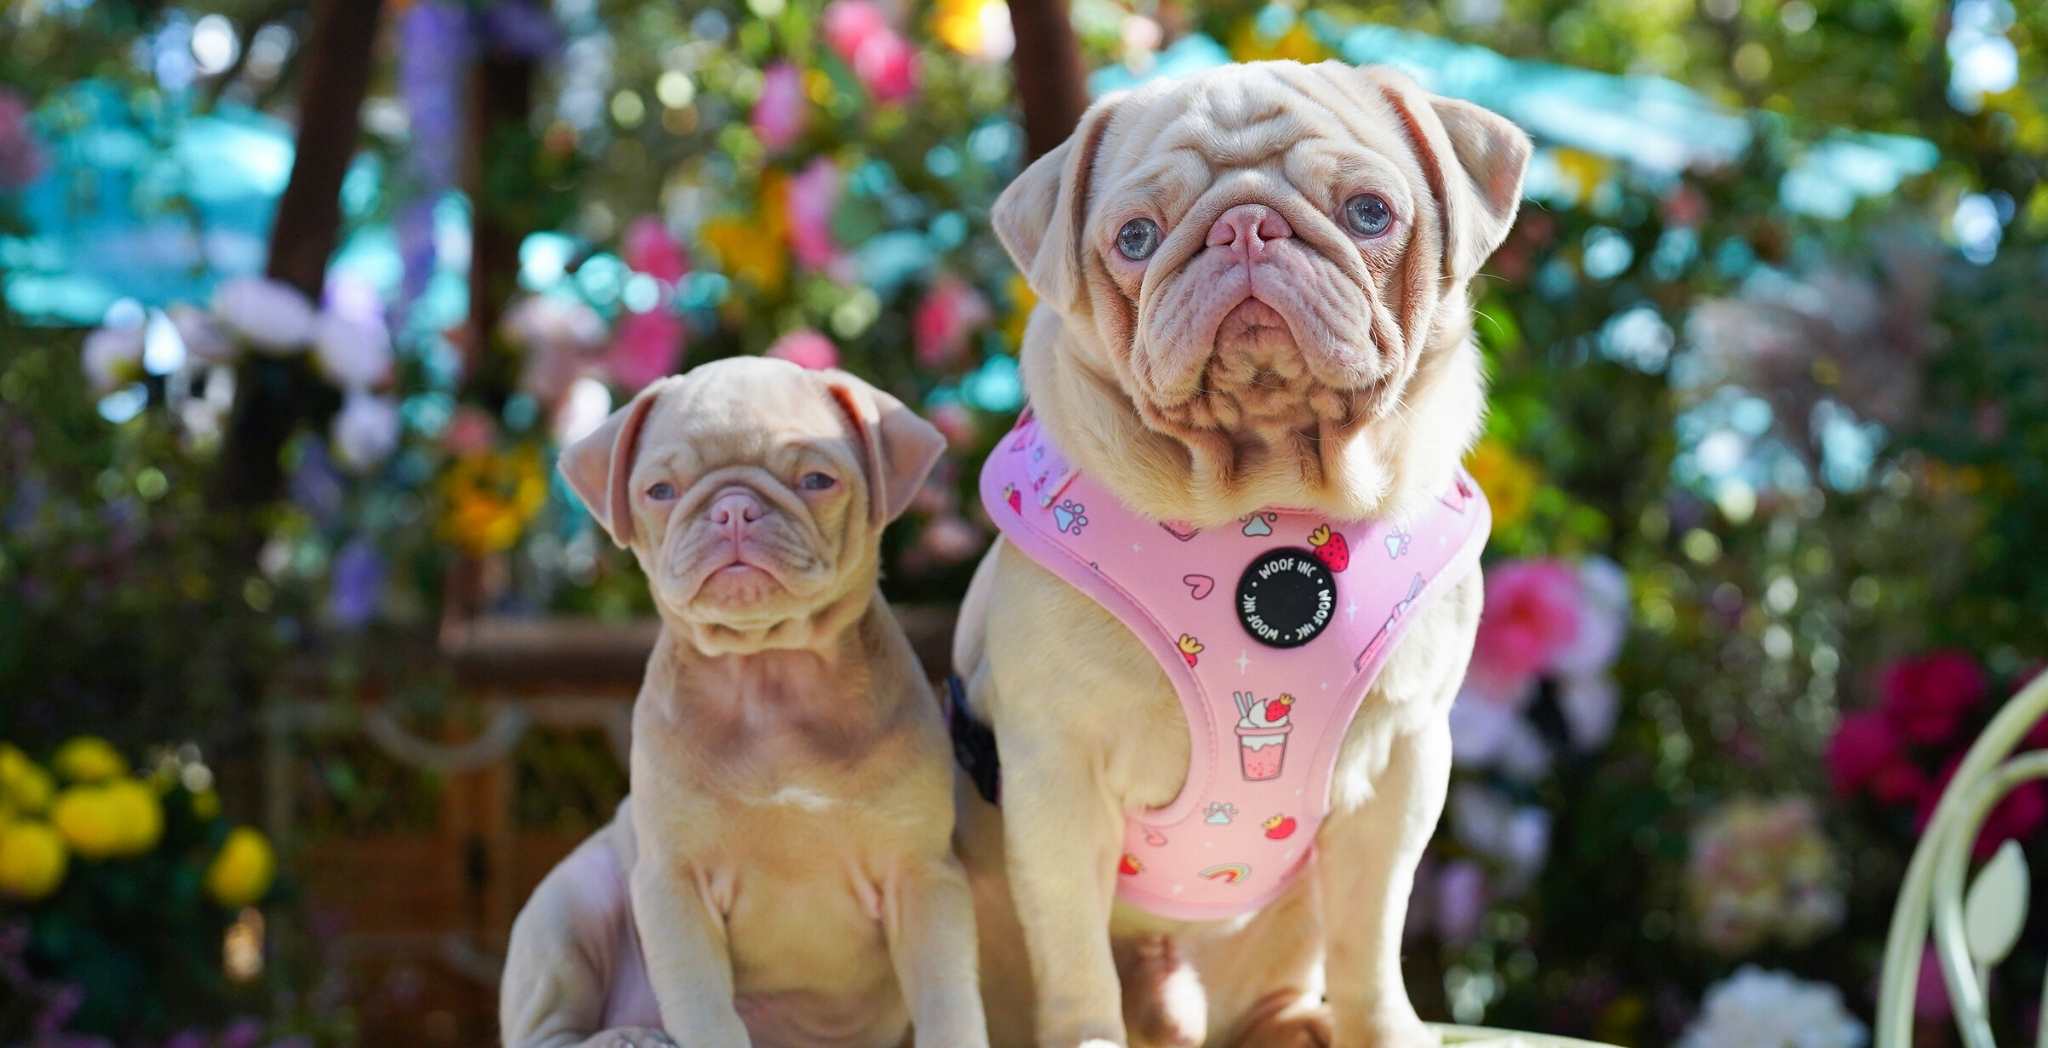 Milkshake the pug and cookie the pink pug wearing comfortable dog harnesses at the Chelsea in Bloom flower show in London